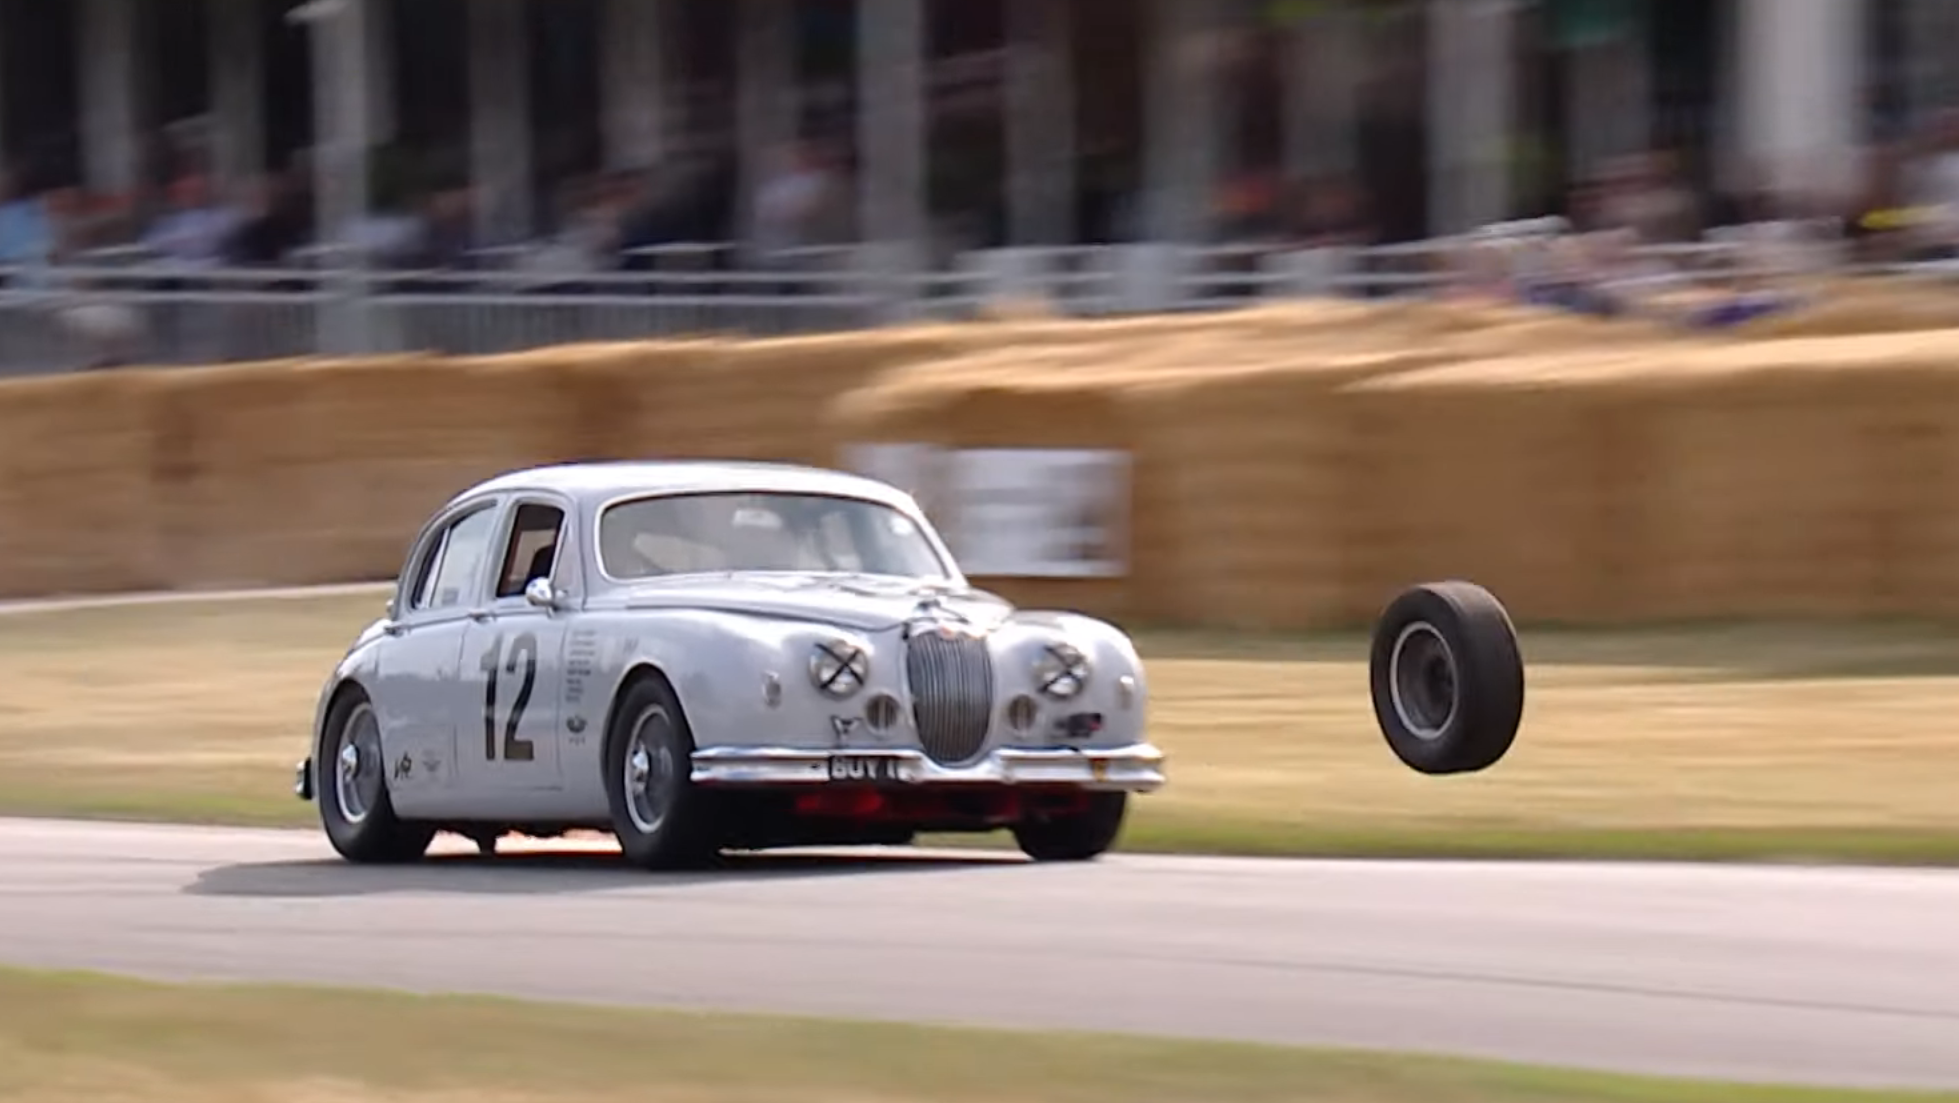 The moment the left rear wheel from a MK1 Jaguar came loose.